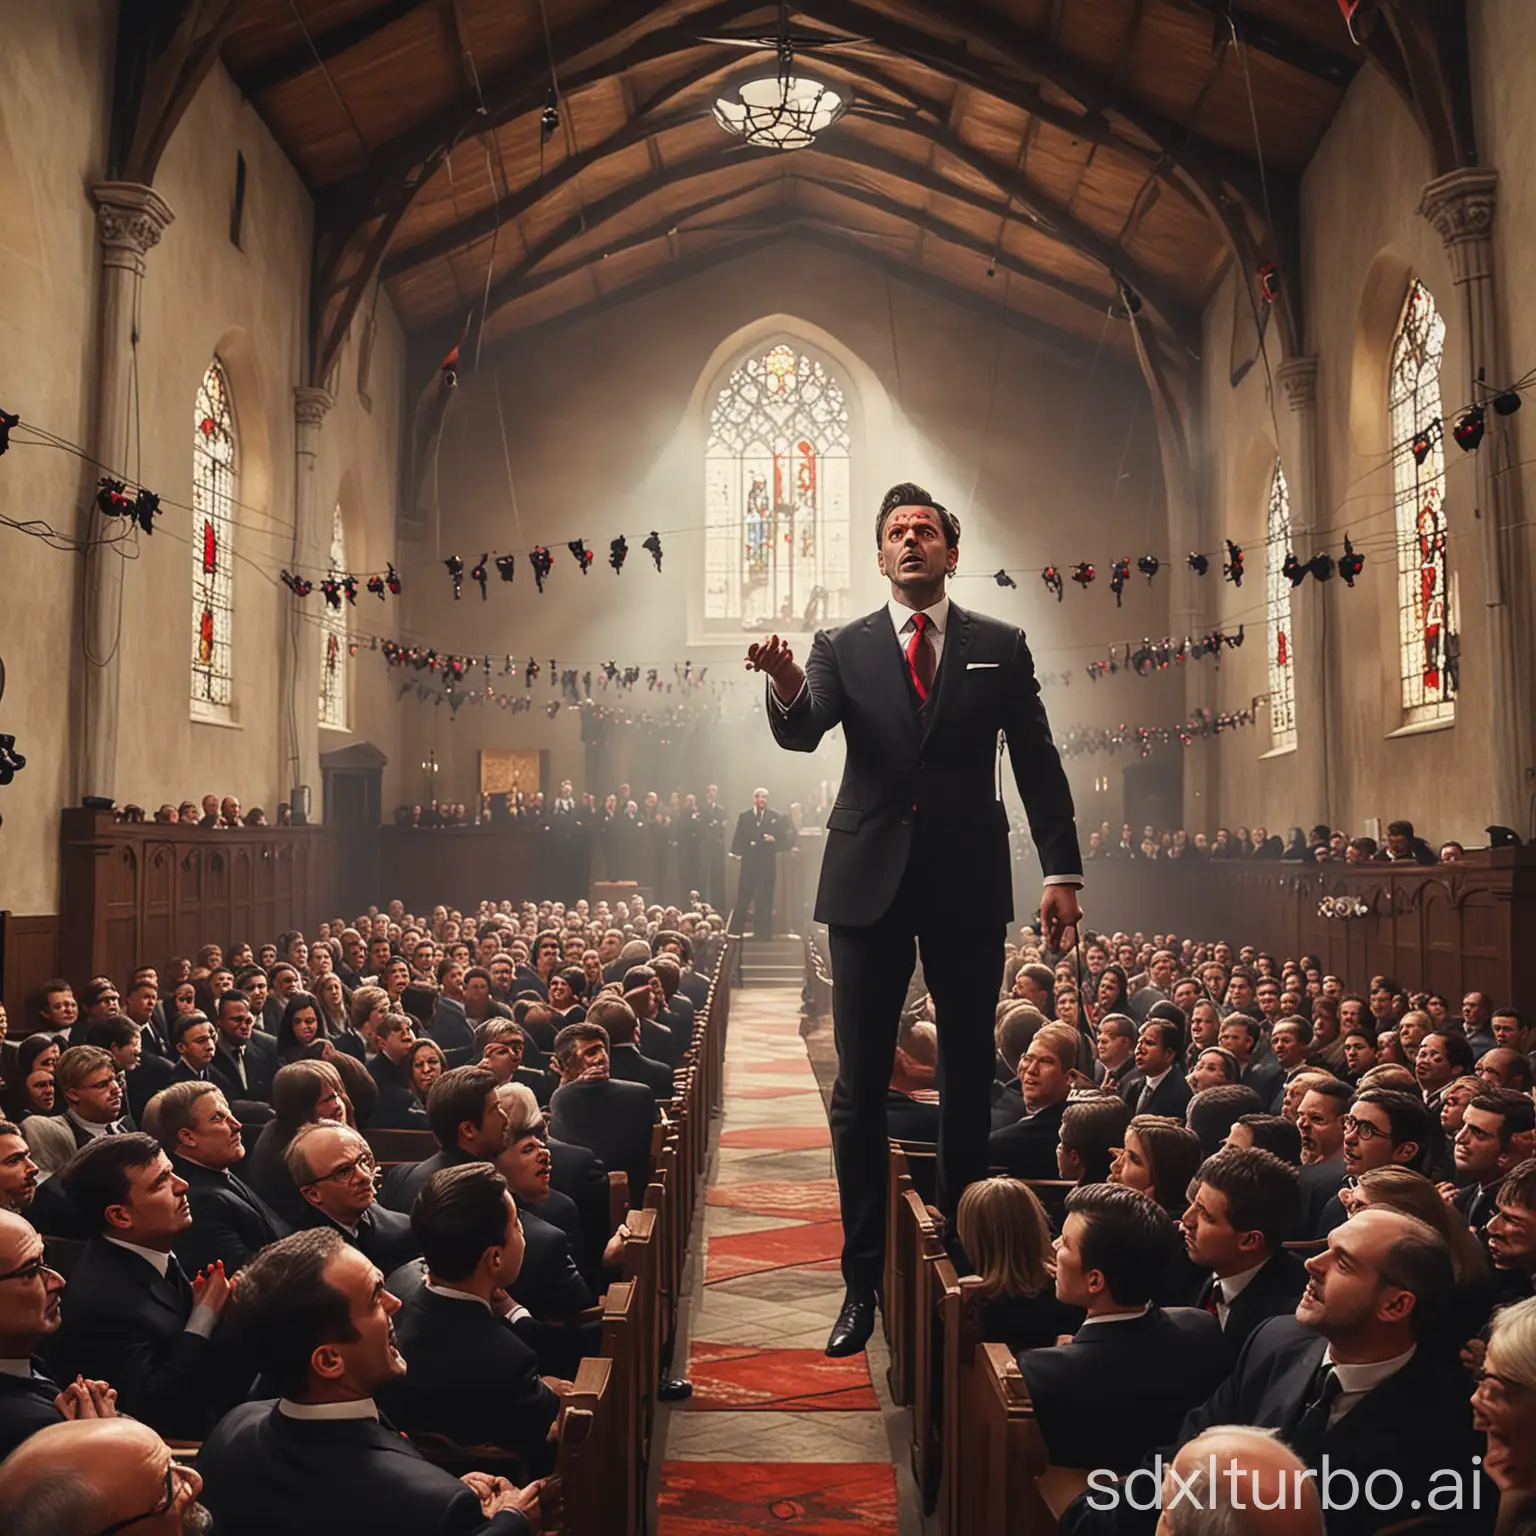 Sinister-Man-Addresses-Congregation-in-Church-with-Marionette-Strings